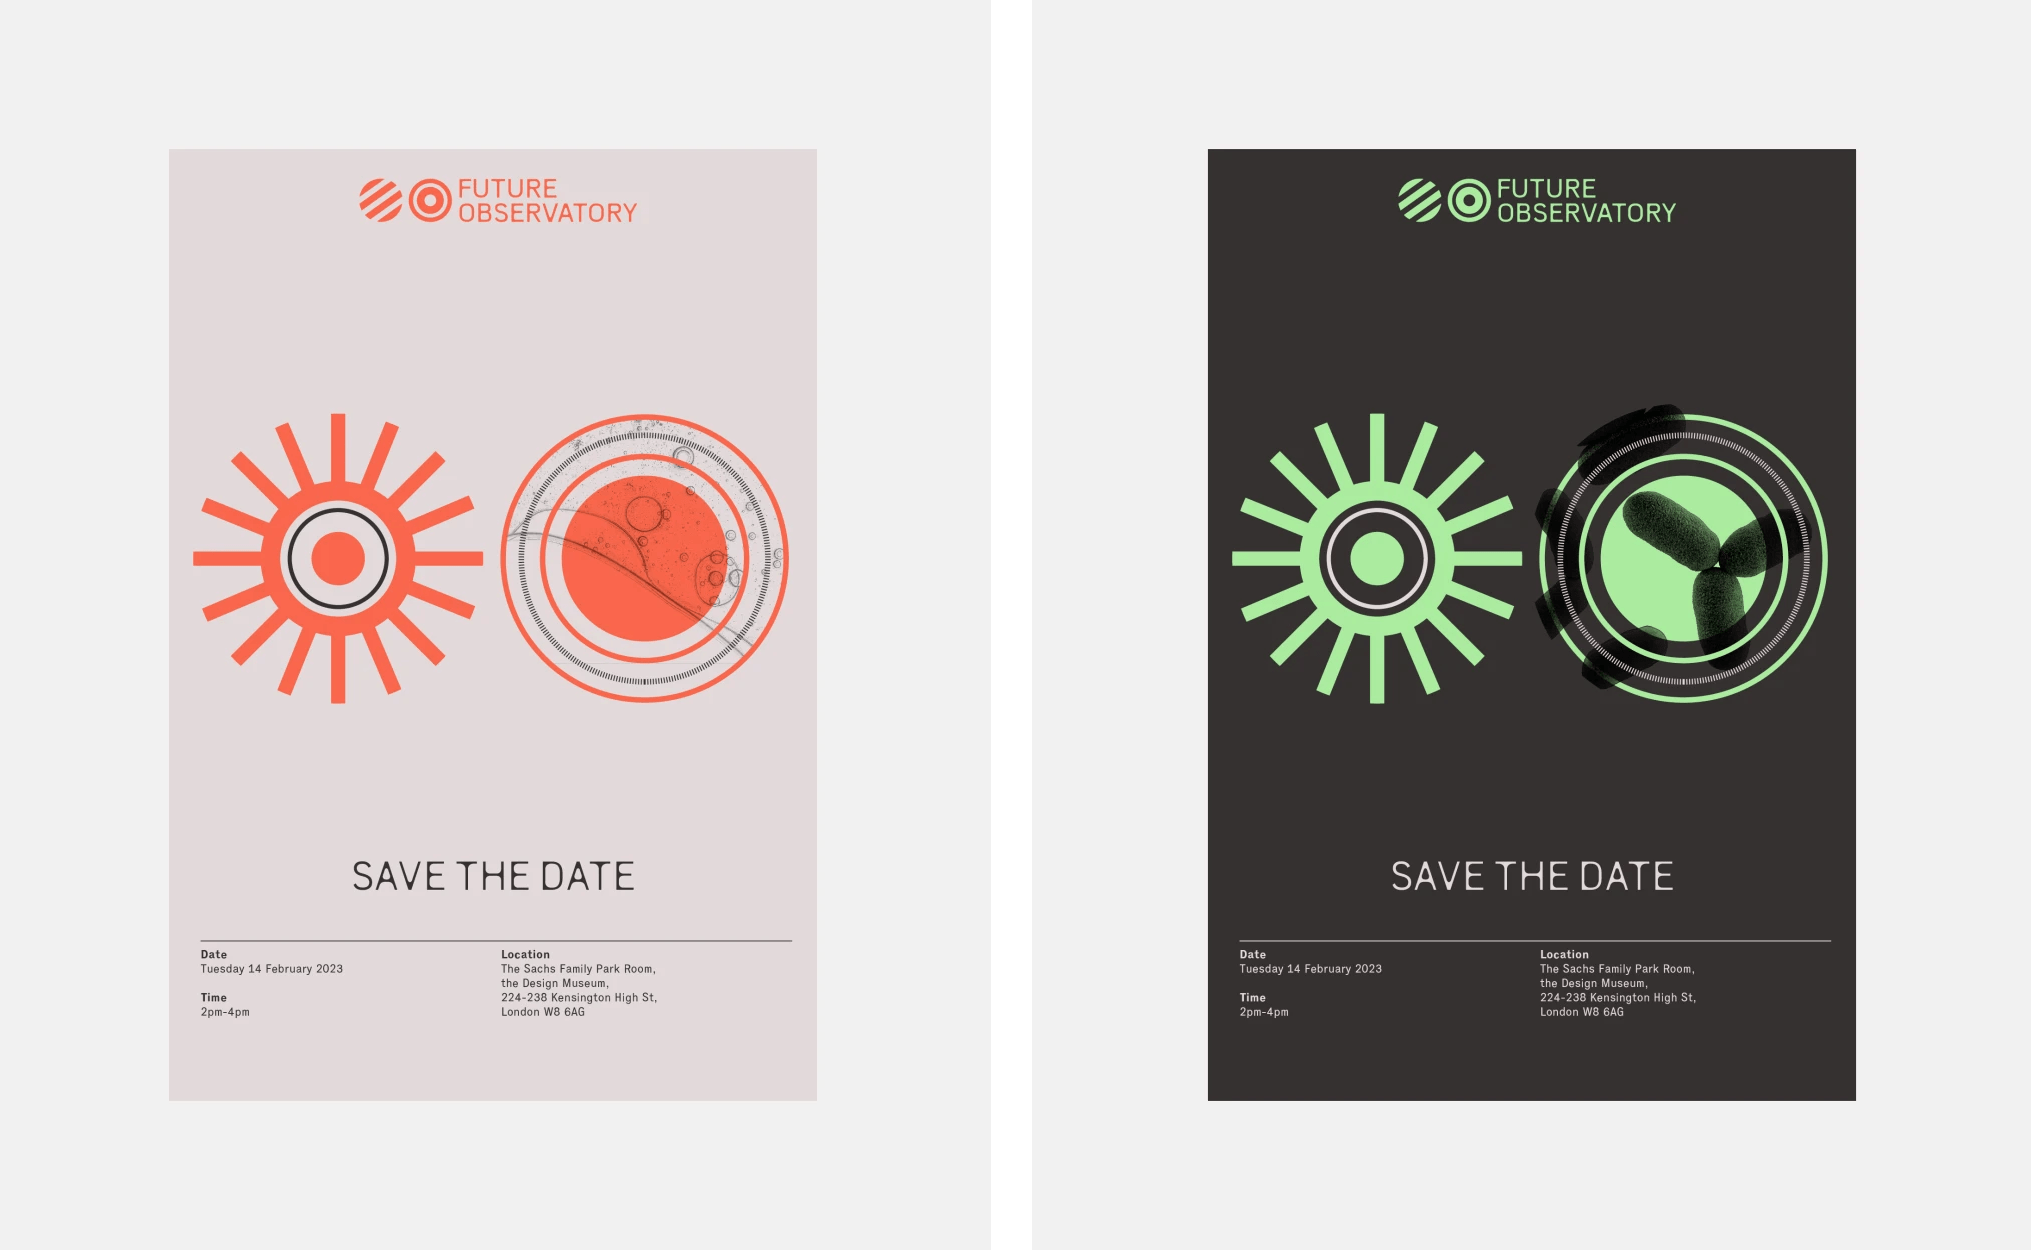 Brand identity and posters by London-based SPIN for London-based design research organisation Future Observatory